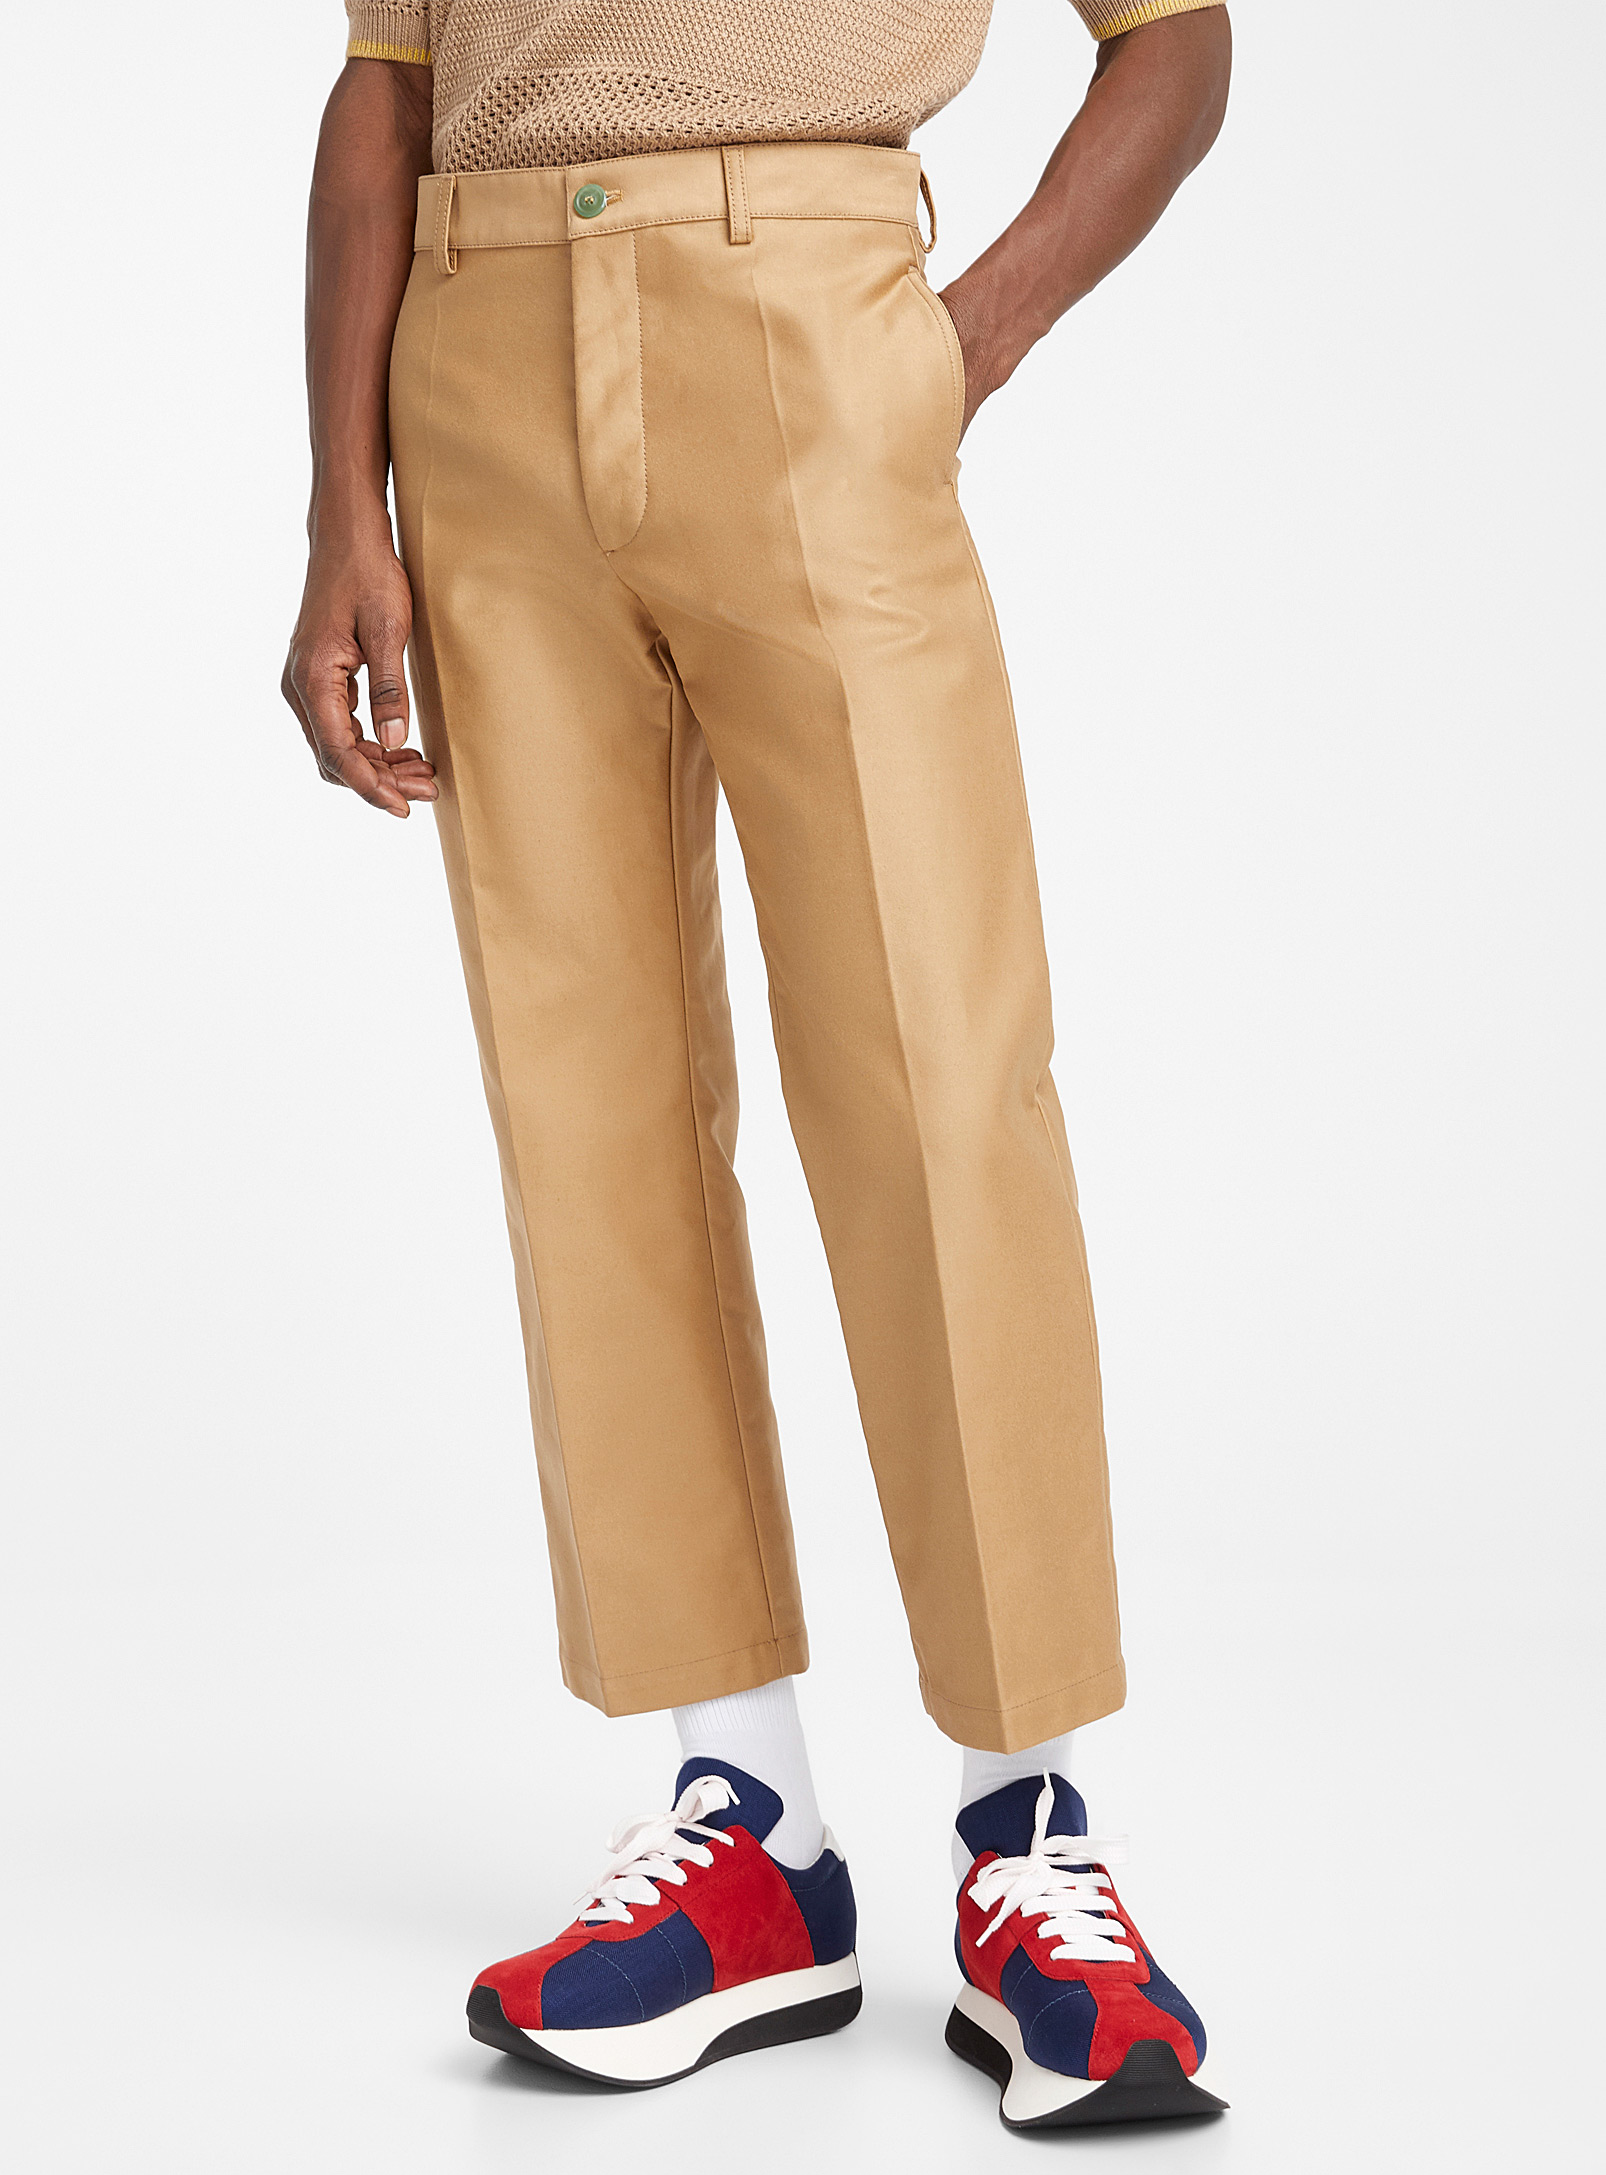 BNWT SS20 MARNI STRUCTURED COTTON PANTS 50 - 1